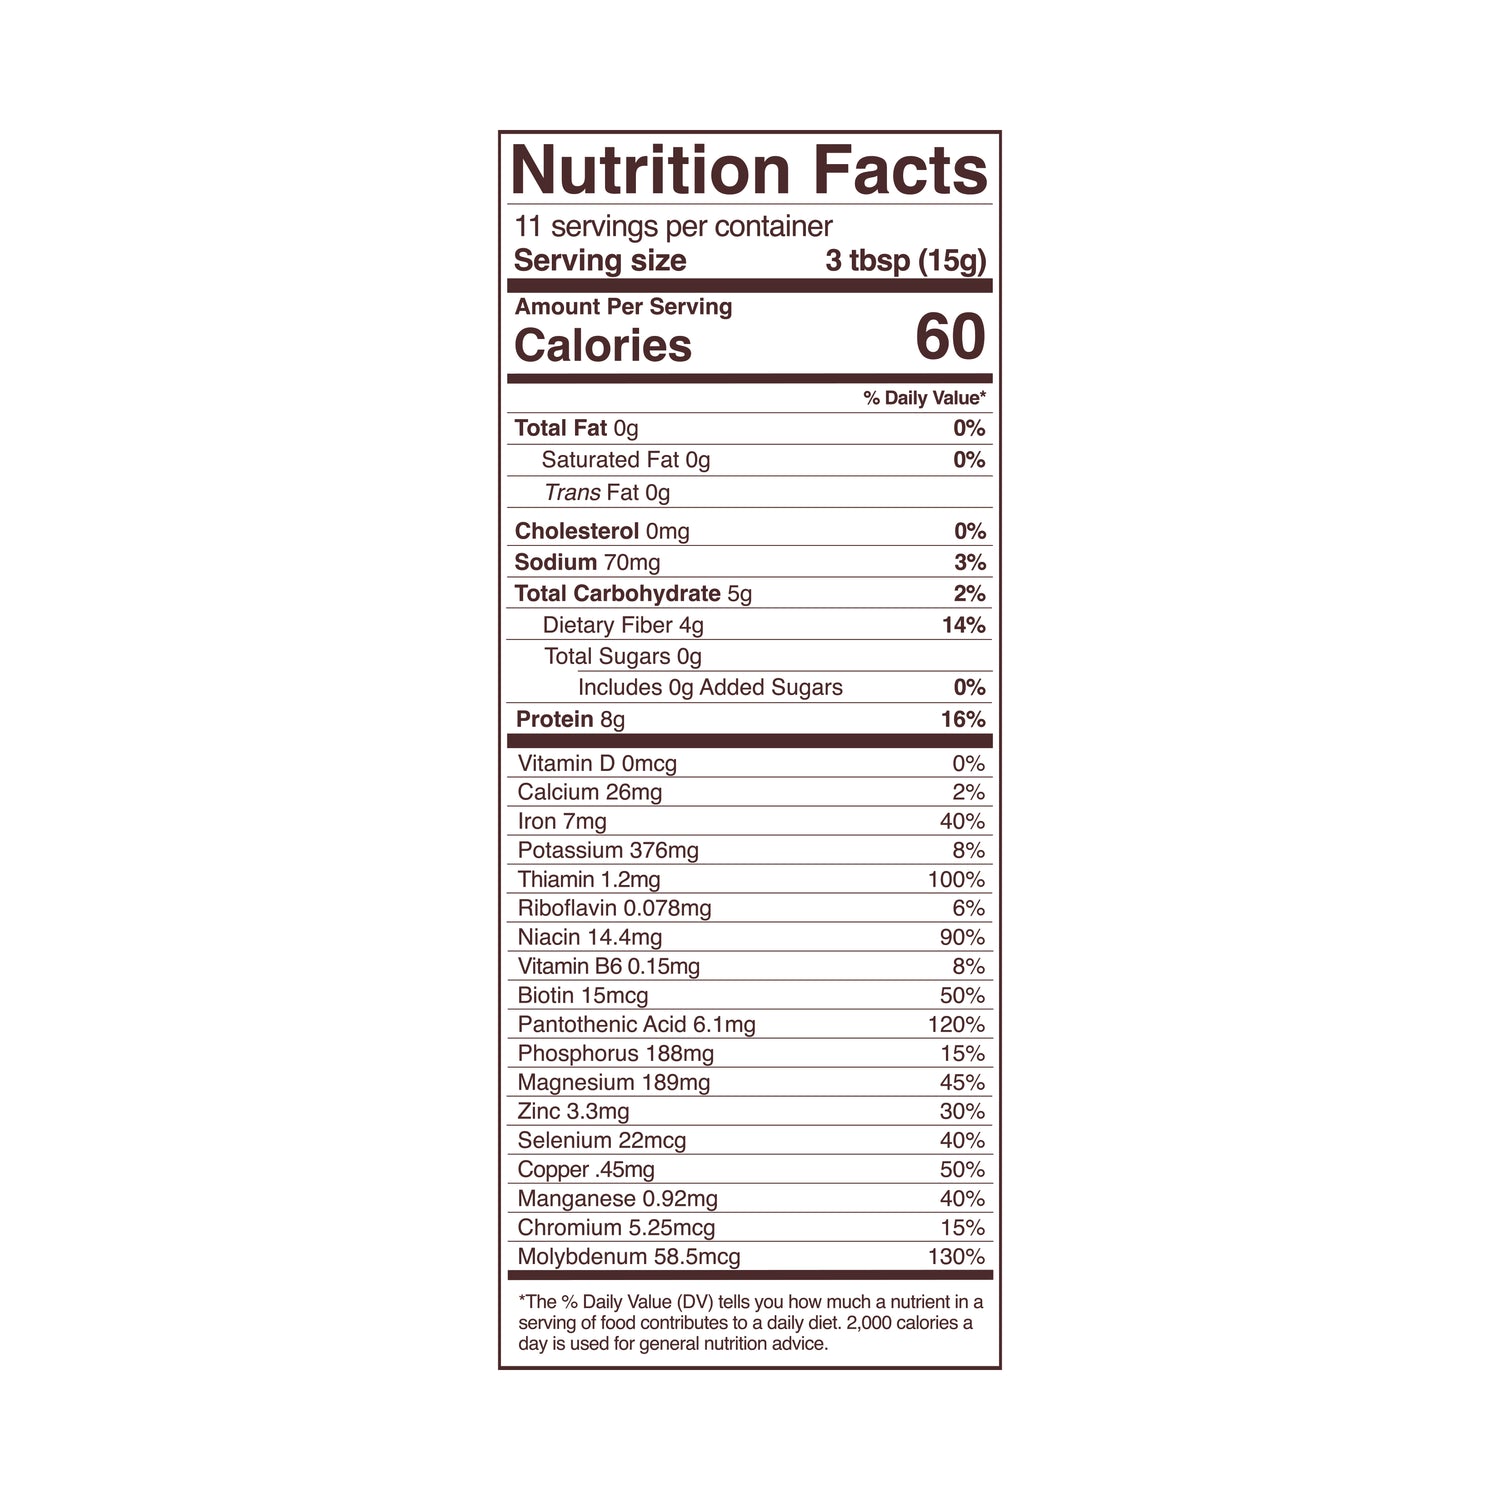 Foods Alive - Nutritional Yeast - 6 oz - Nutrition Facts